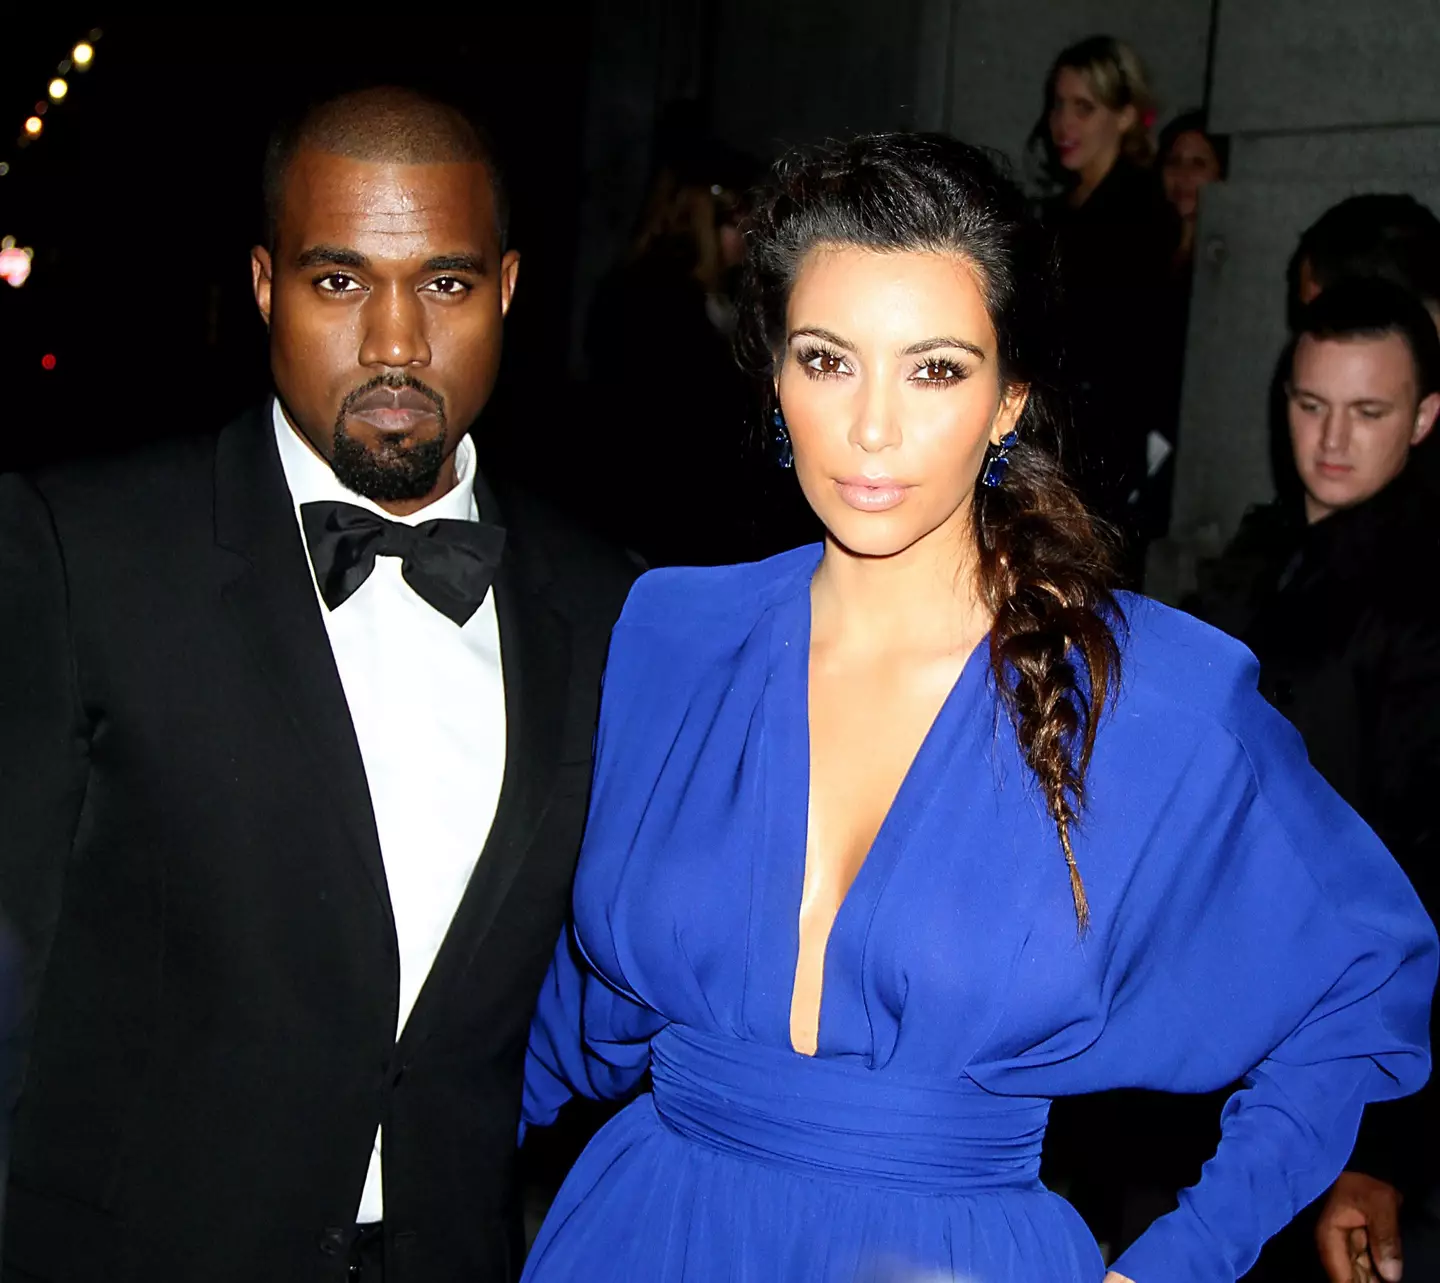 Kim and Kanye, with Kardashian wearing THE dress in question.